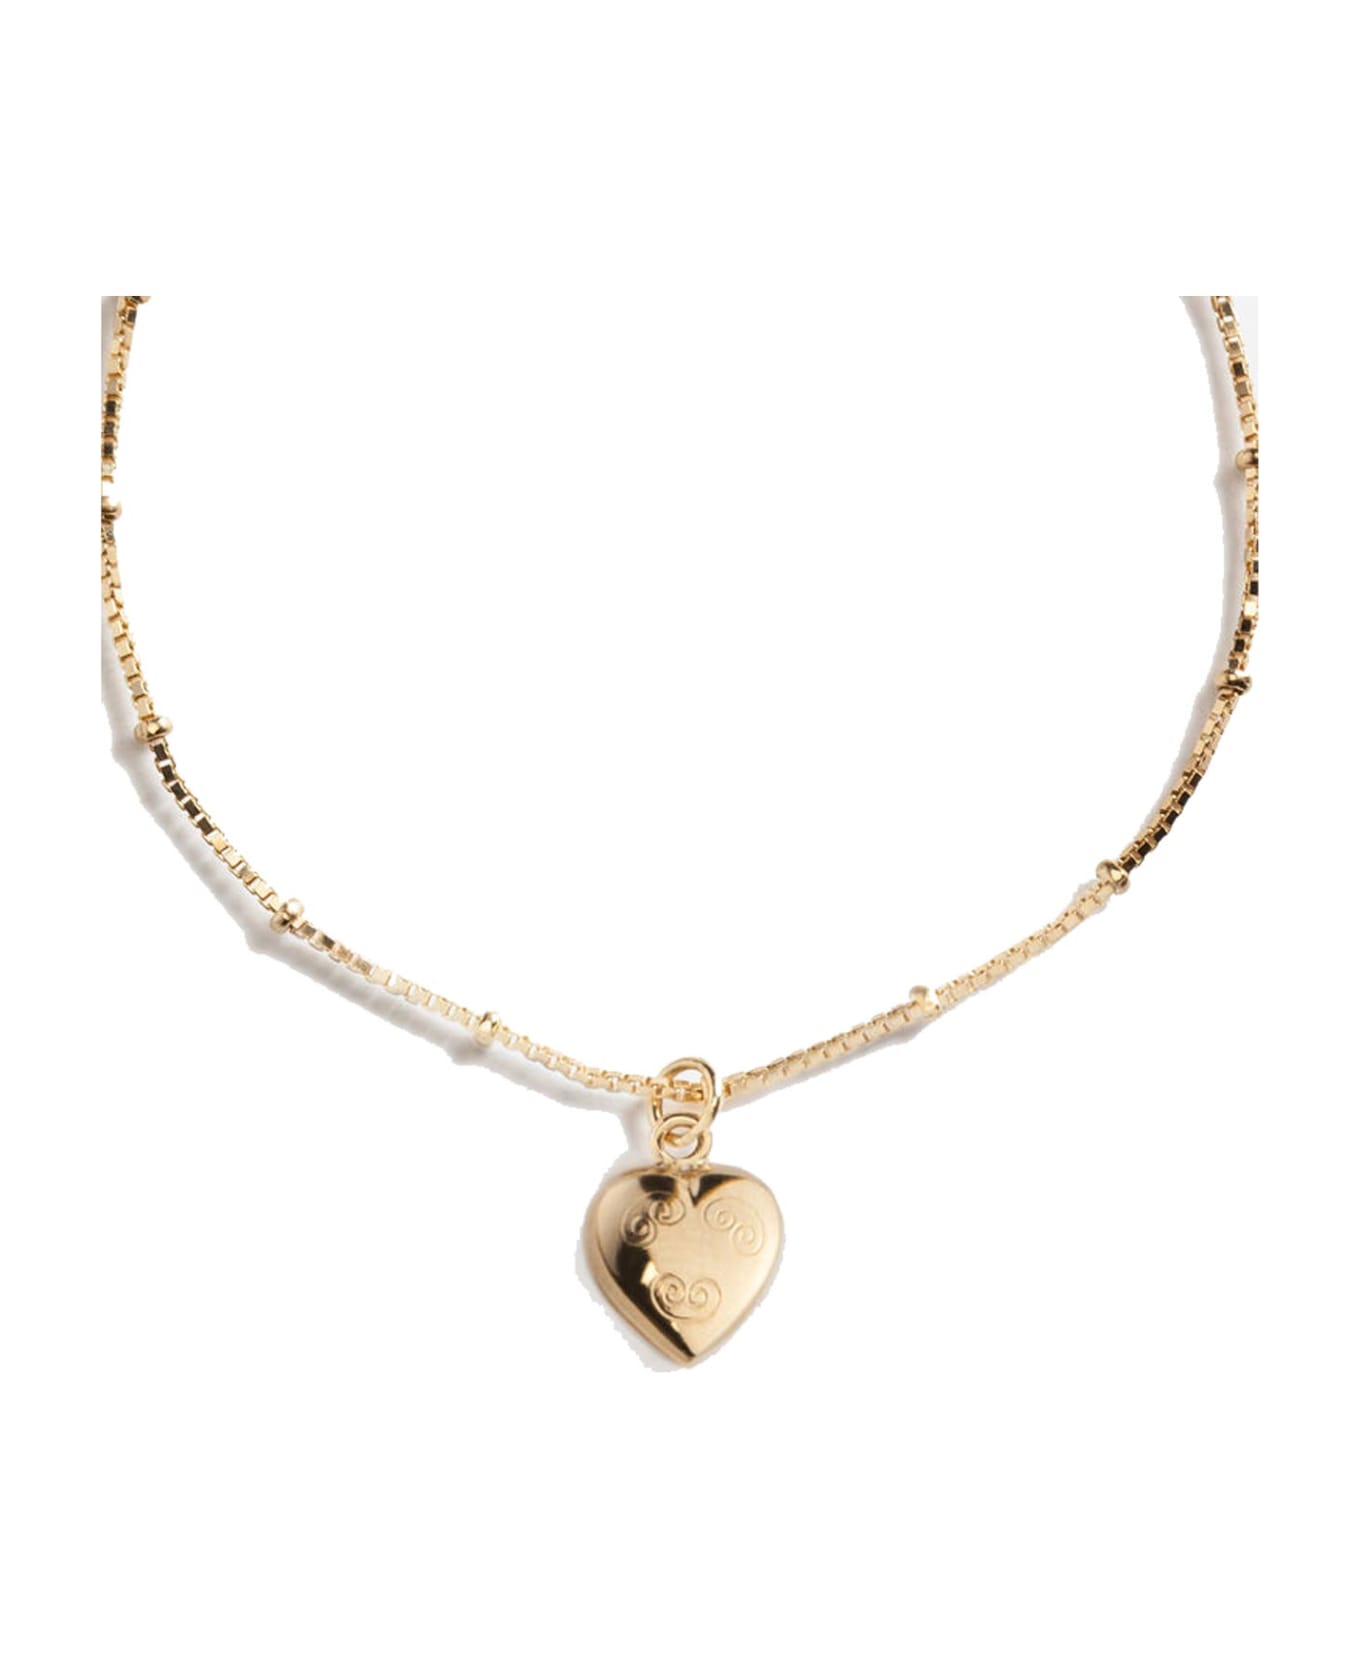 Dolce & Gabbana Bracelet With Heart Charm - Gold アクセサリー＆ギフト